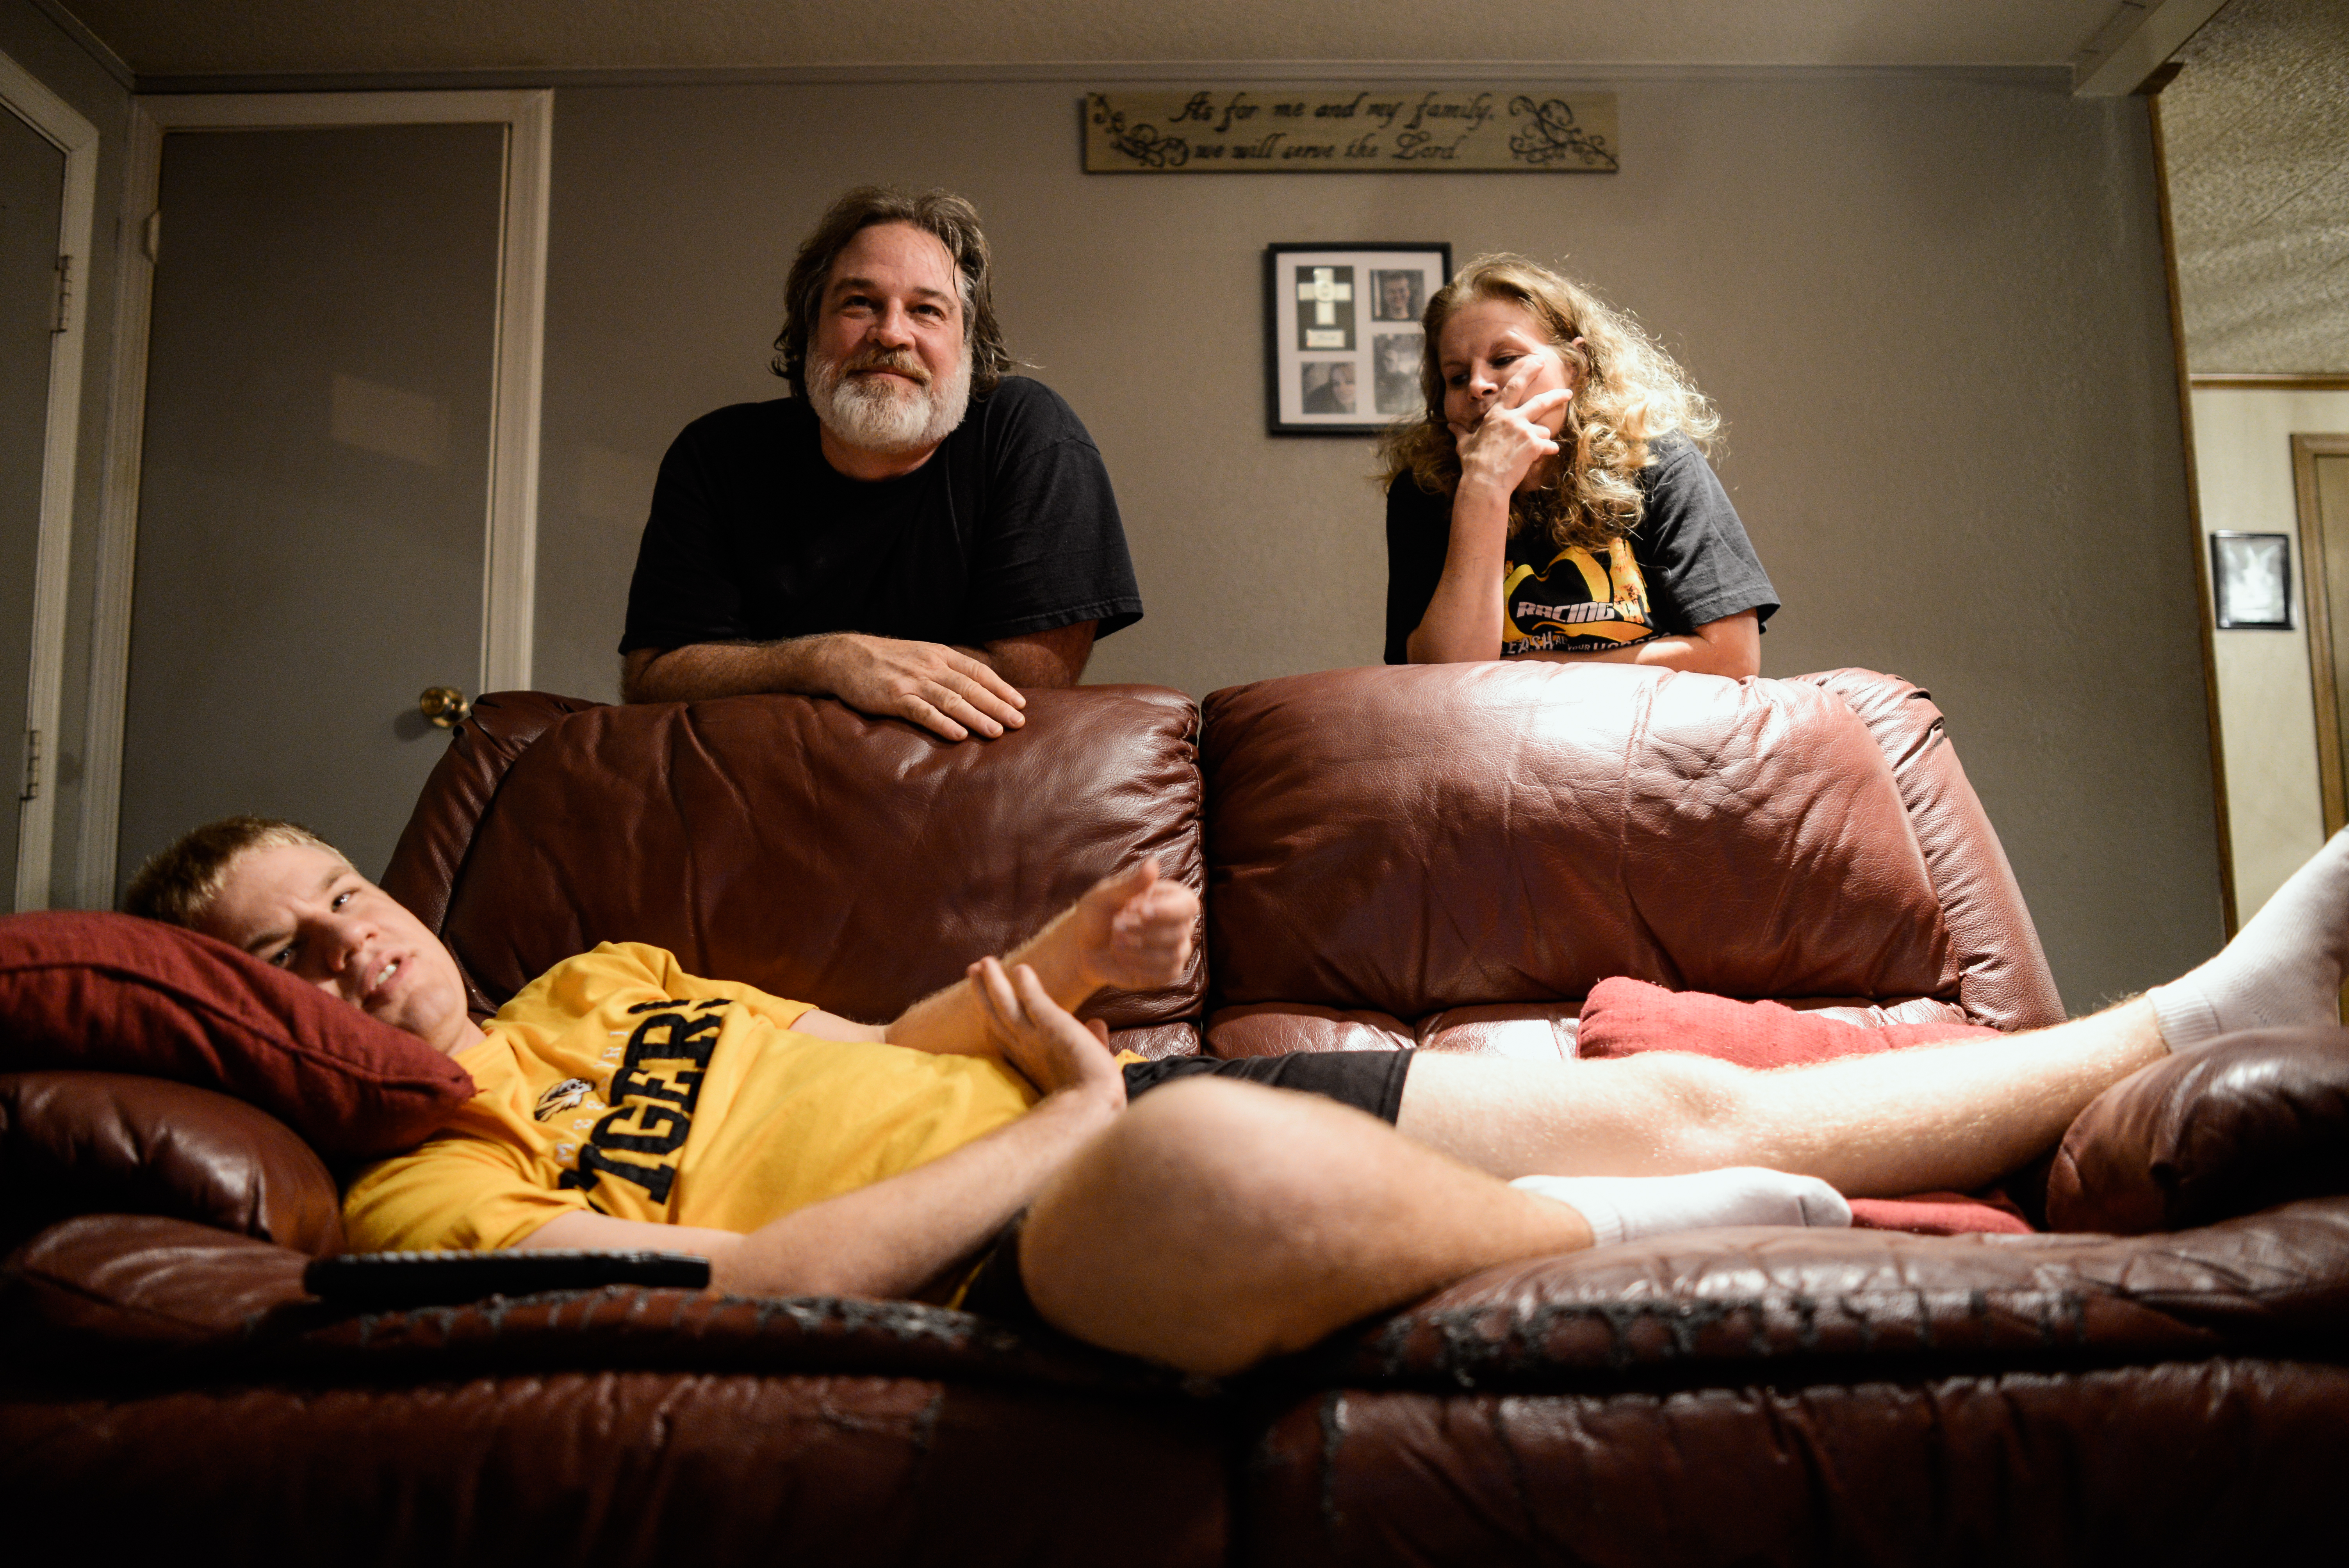  Trenton, Missouri. 2013.&nbsp;  A nightly ritual, Dalton and his parents, Casey and Joyce, spend some time together watching television. 